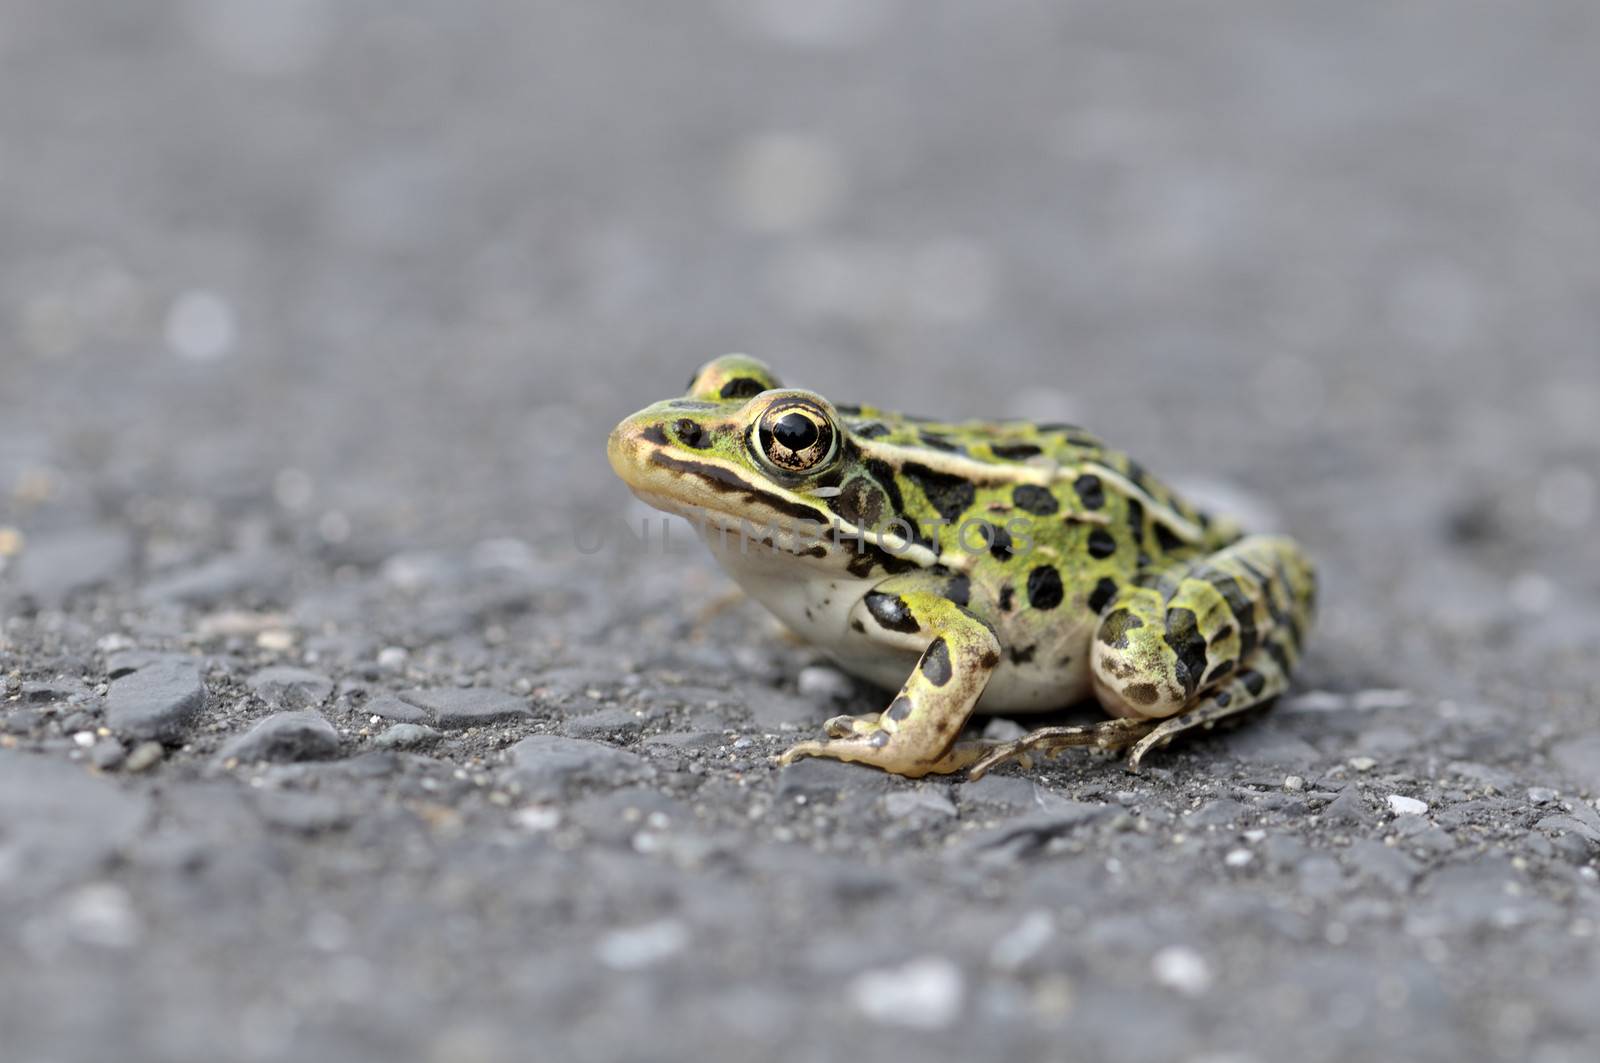 frog on road by Hbak